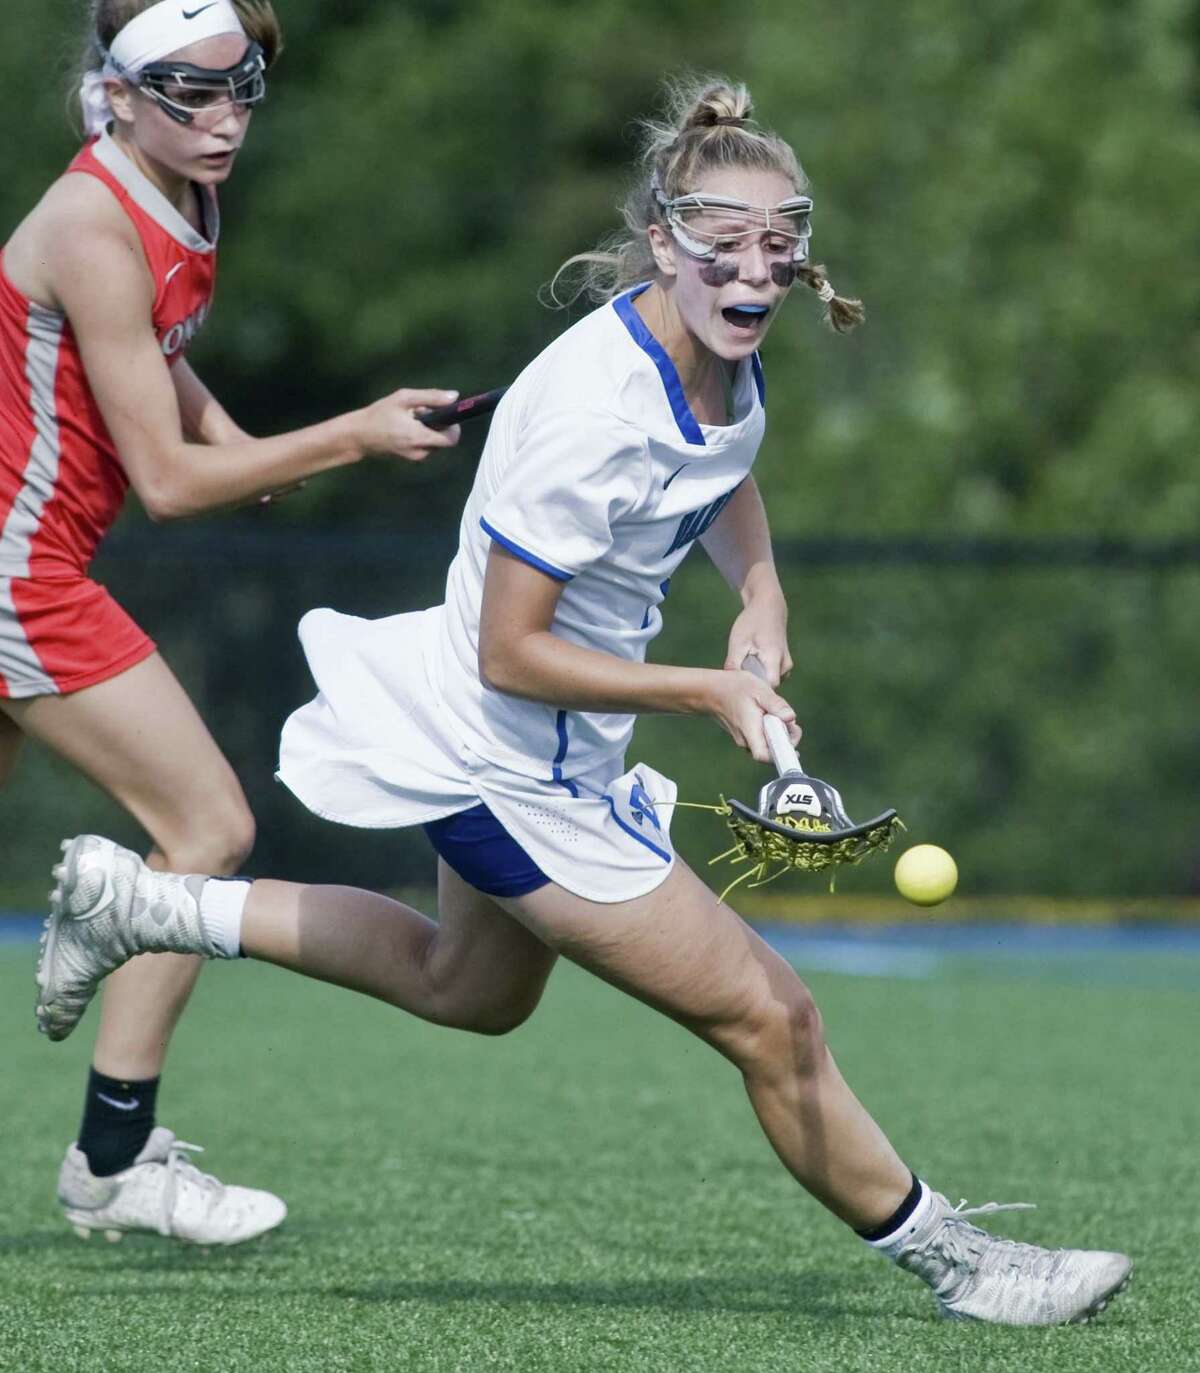 Darien High School's Emma Jaques chases a loose ball in the Class L girls lacrosse game against Conard High School, played at Darien. Thursday, June 1, 2017